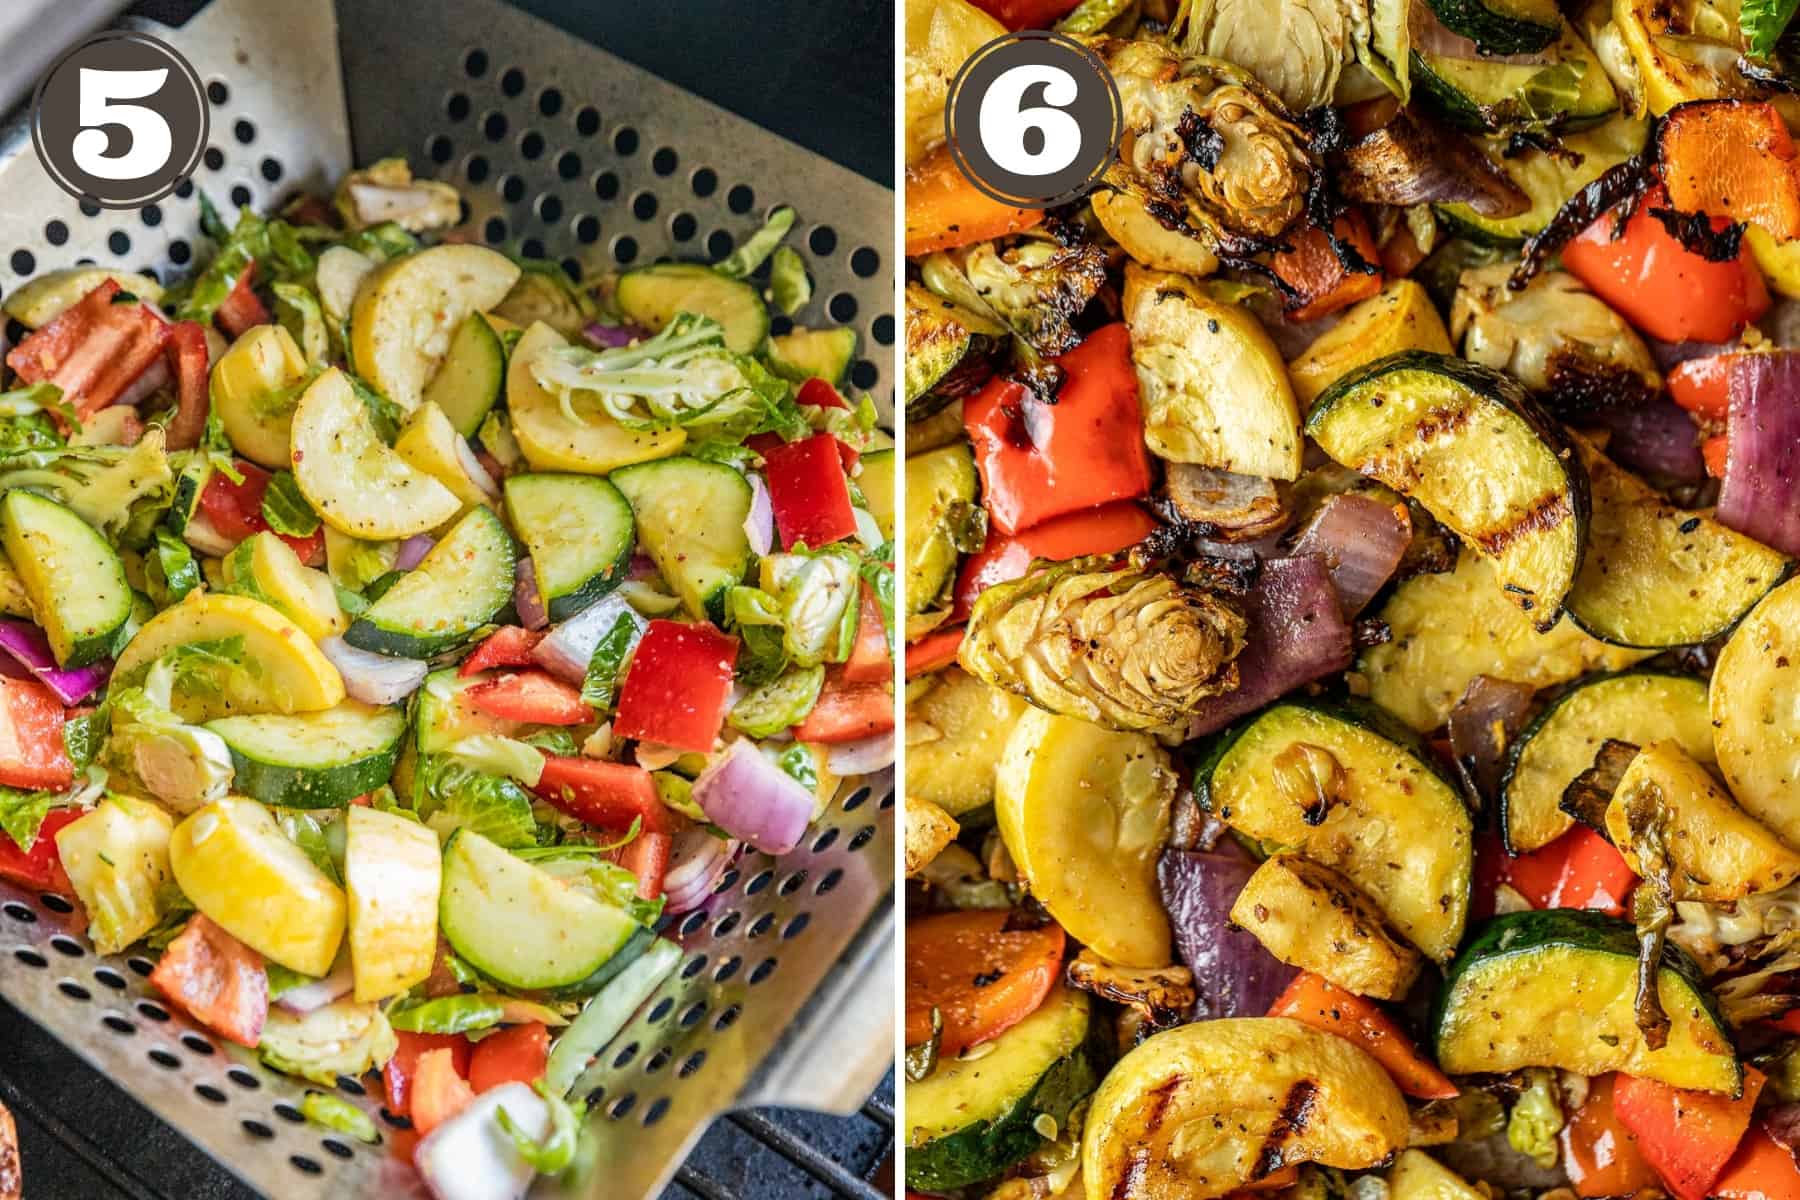 Side by side photos showing vegetables smoking in a grill basket and being served on a baking dish.